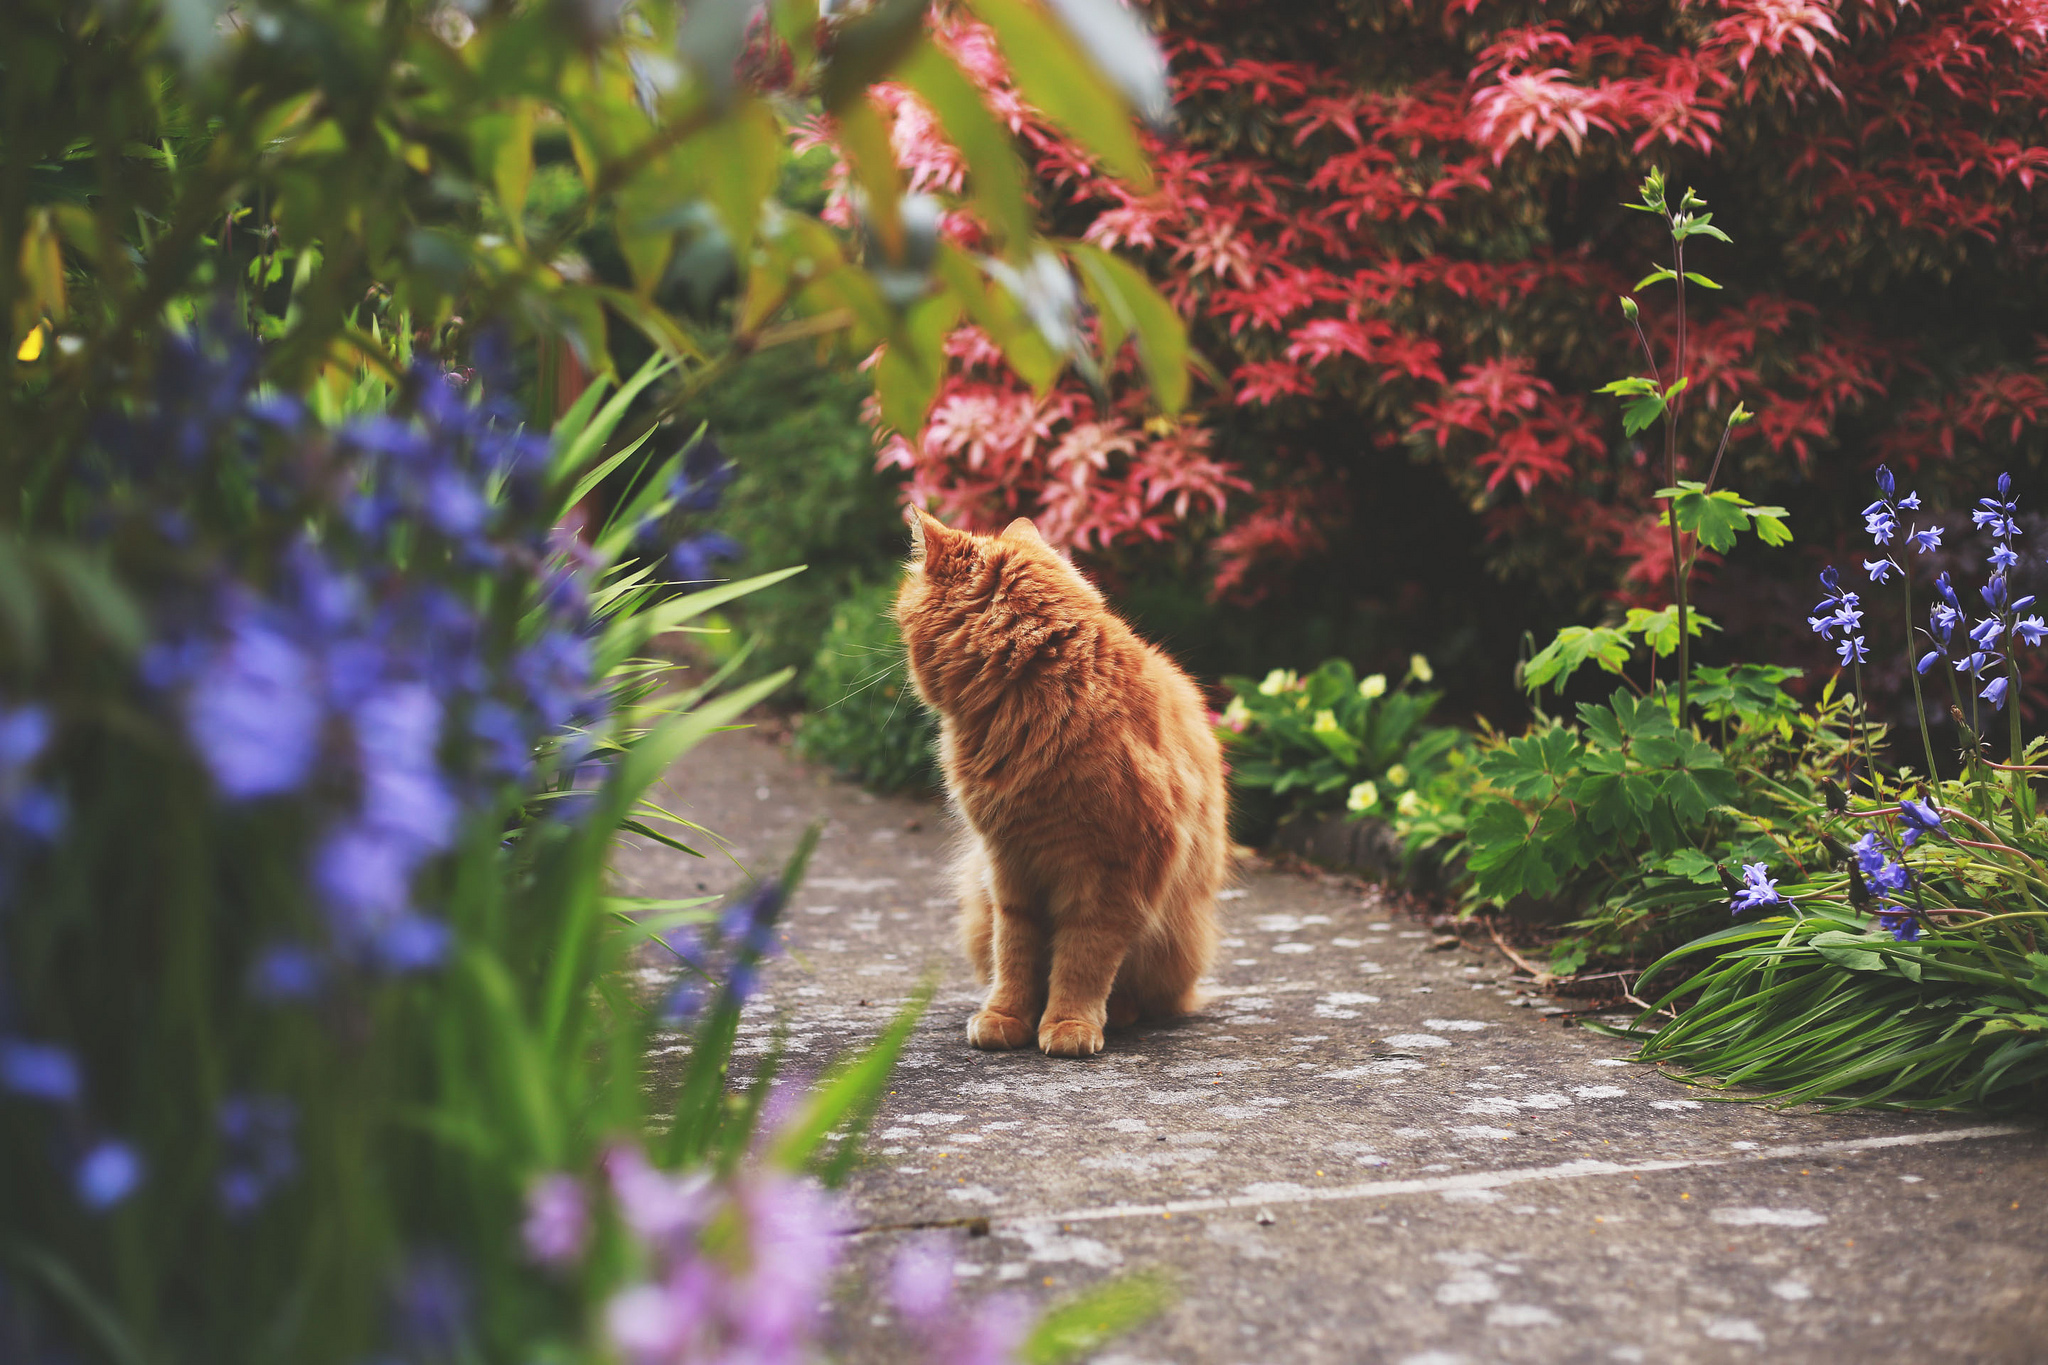 General 2048x1365 animals cats flowers path depth of field vibrant